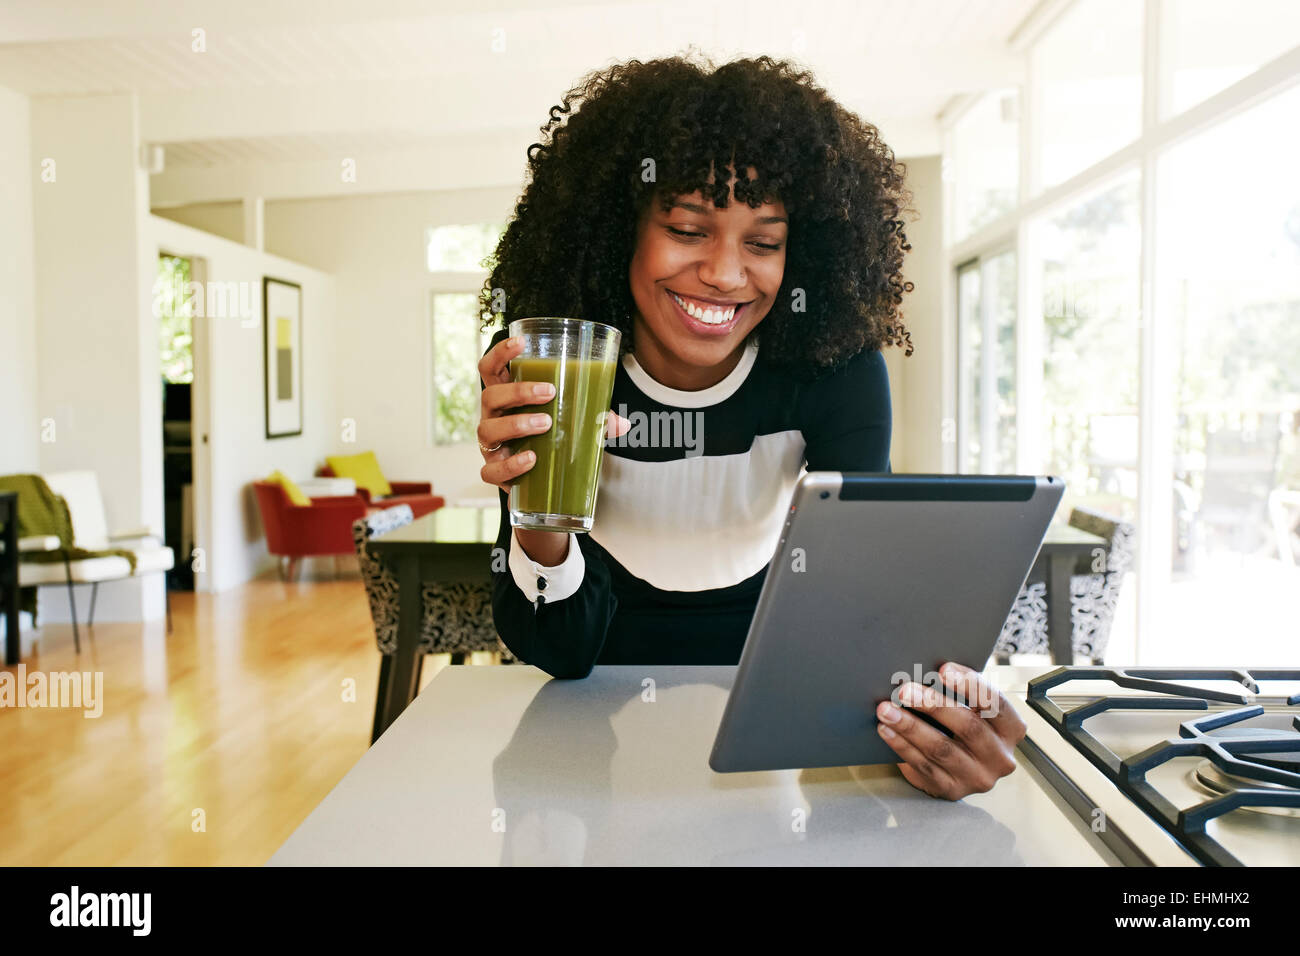 Mixed race woman using digital tablet in domestic kitchen Stock Photo